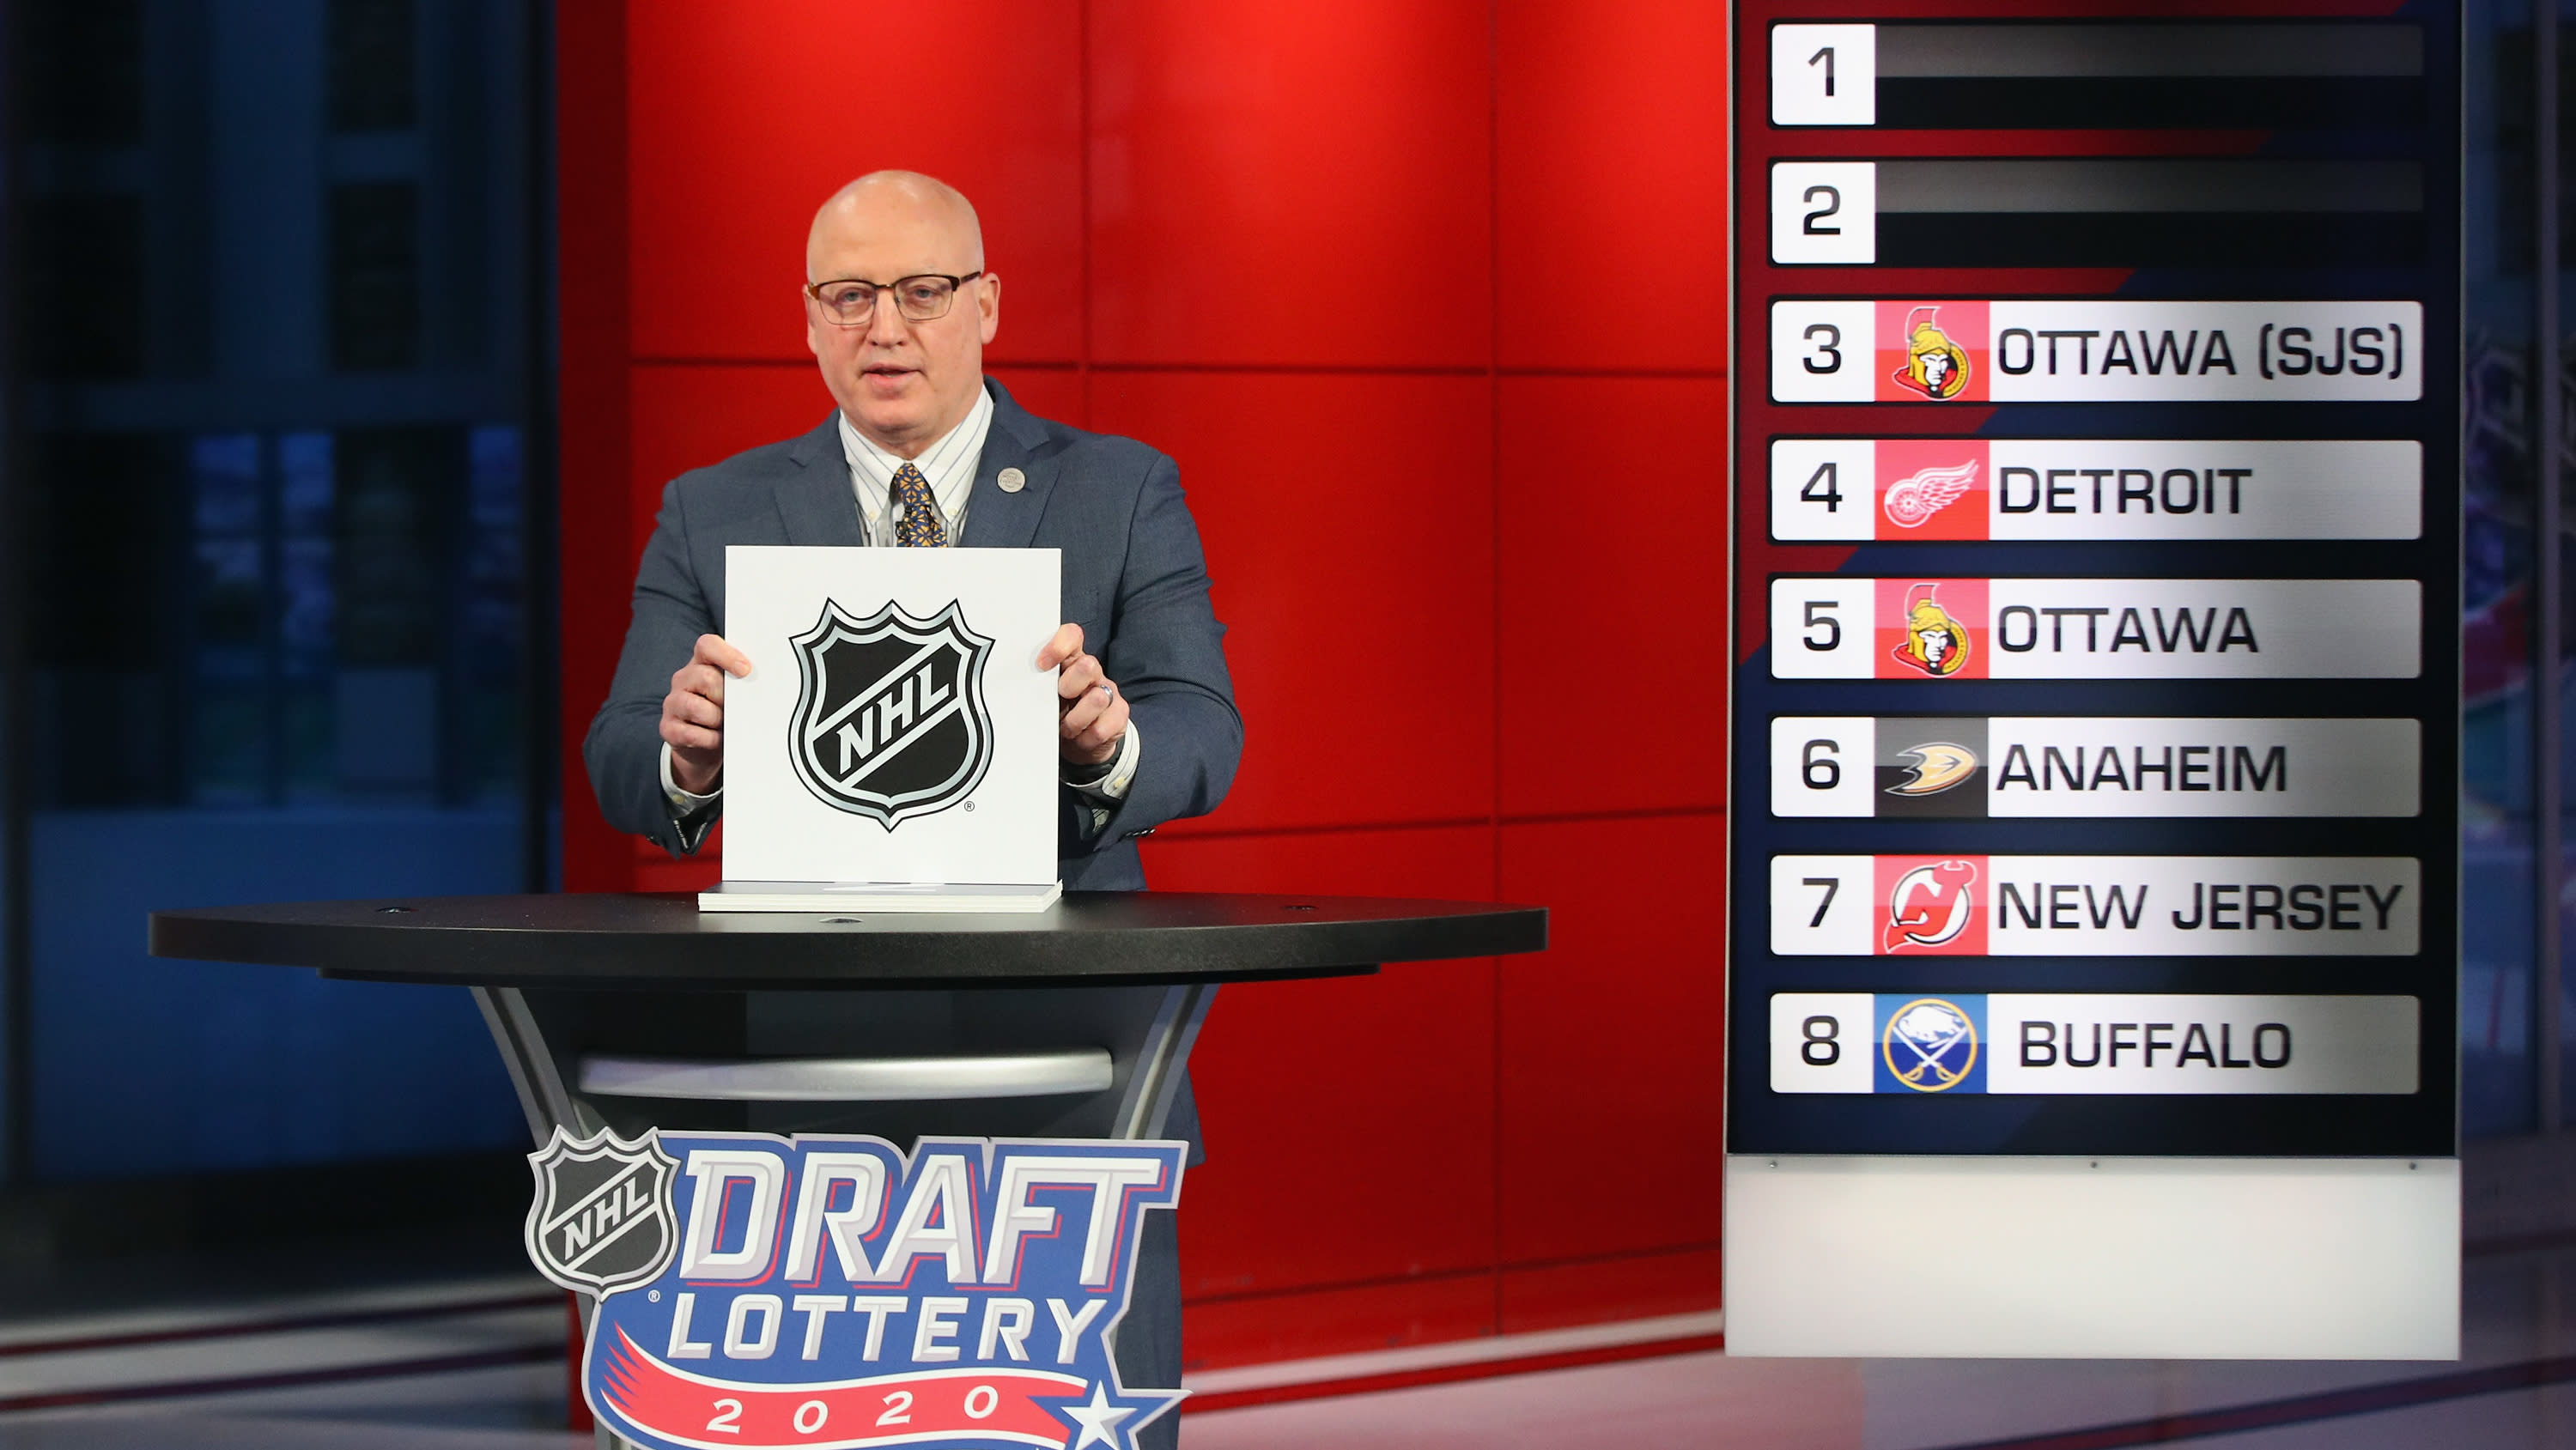 TBD Draft Lottery result was chaotic 